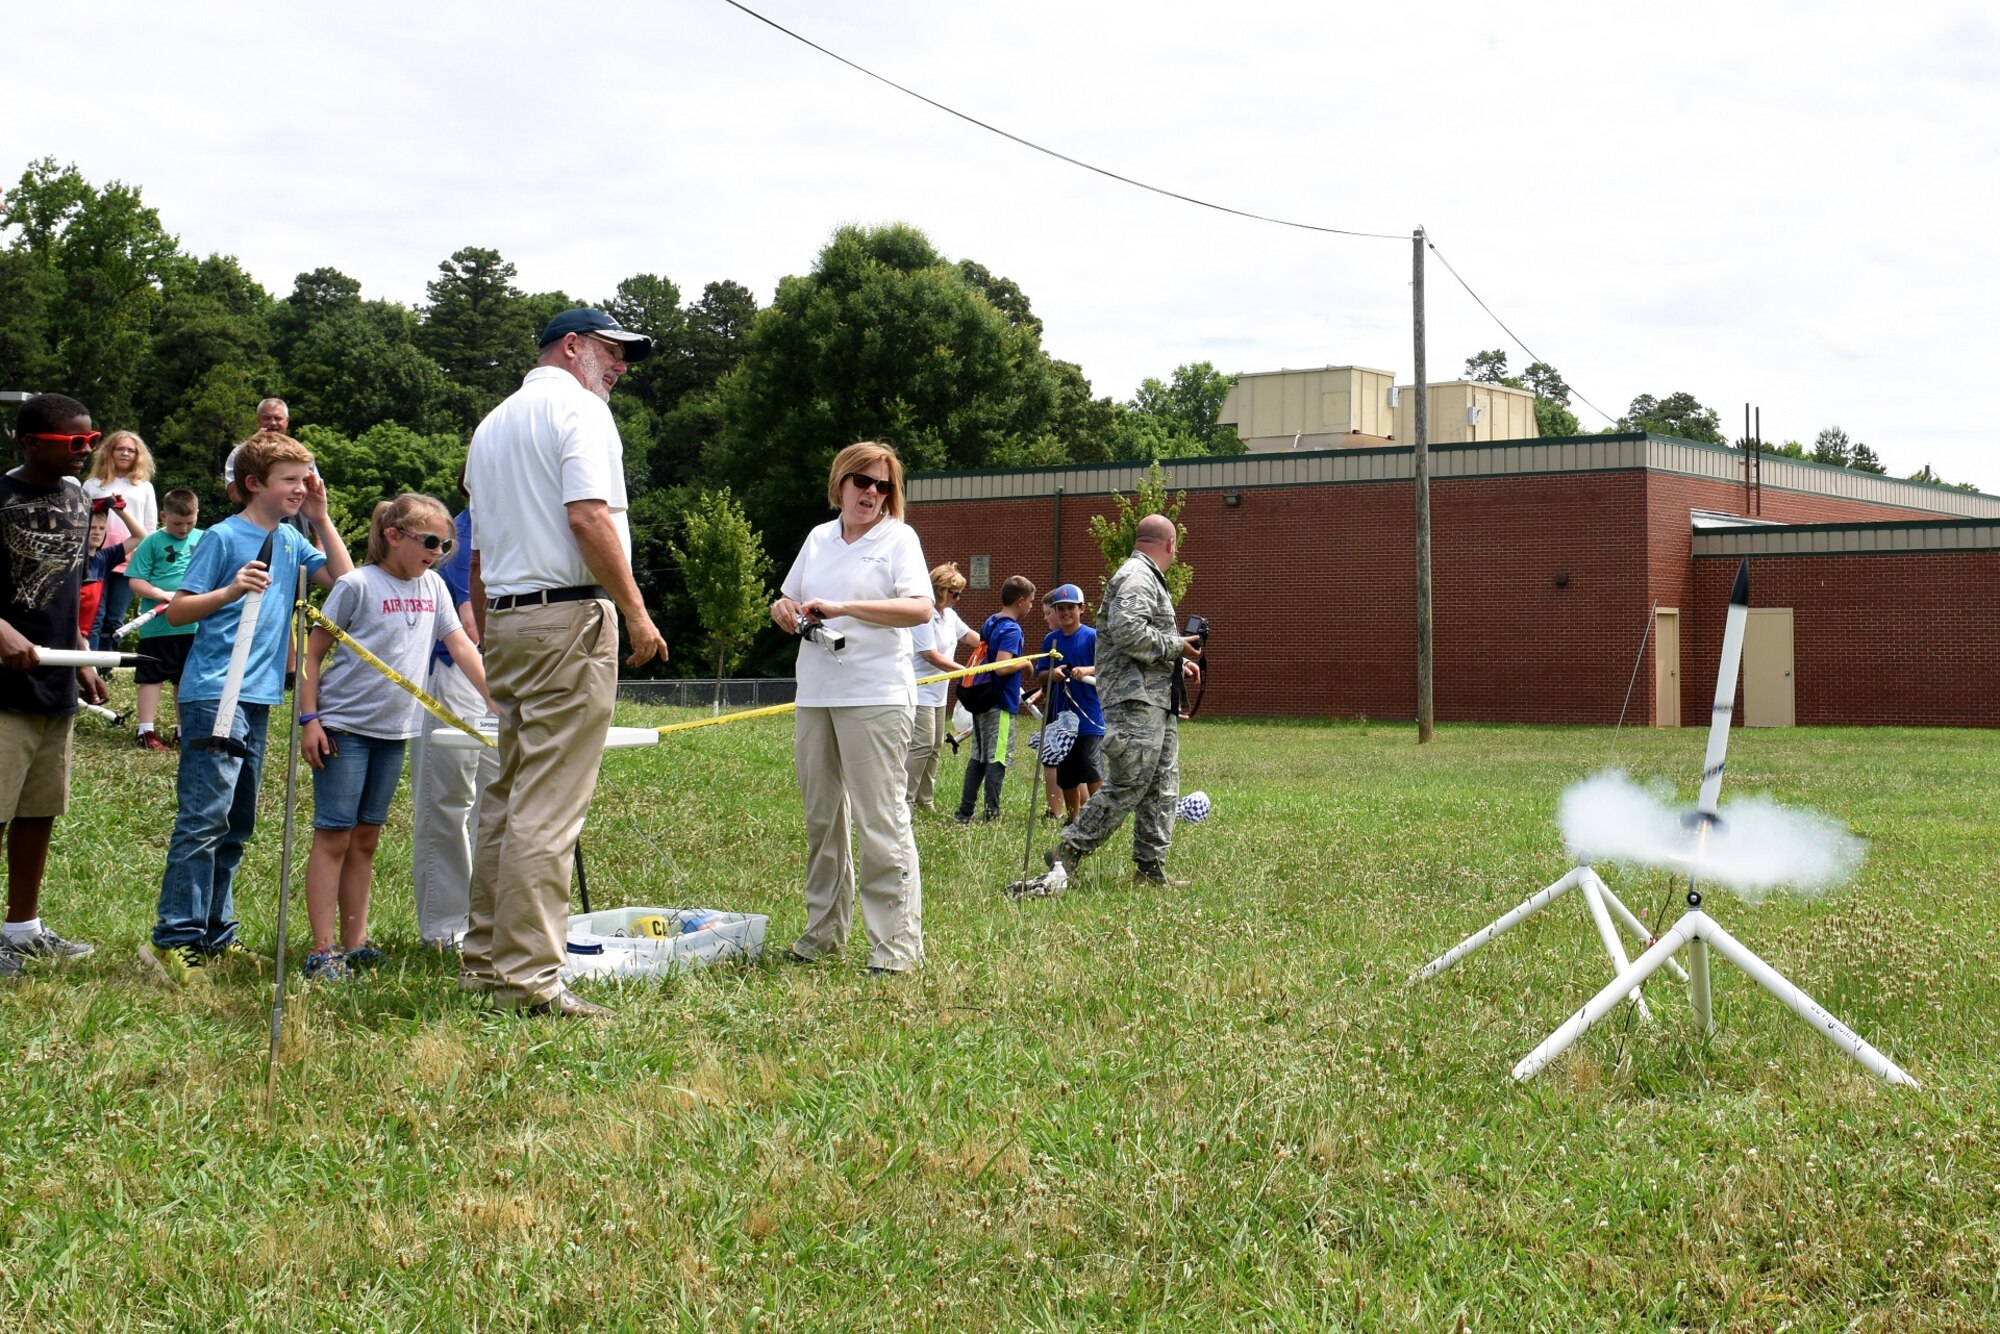 Parents, campers, and teachers watch as model rockets launch near Reid Park Academy Charlotte, N.C., June 21, 2018. The campers and teachers are part of the annual Department of Defense STARBASE summer camp program with the North Carolina Air National Guard and they learn various applications of science, technology, engineering, and math.